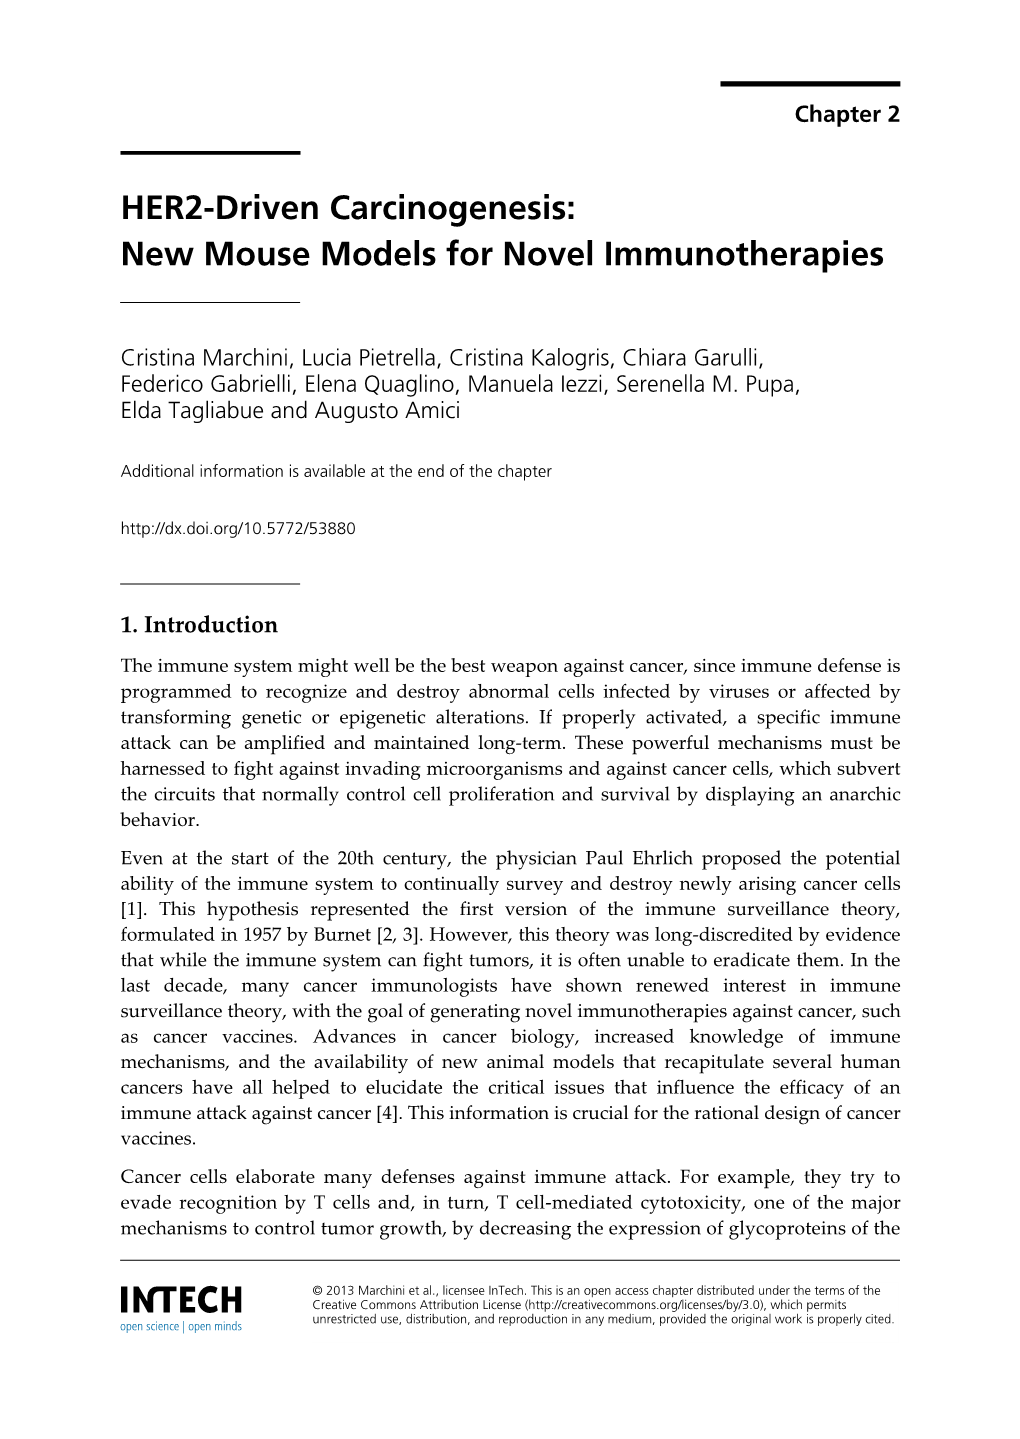 HER2-Driven Carcinogenesis: New Mouse Models for Novel Immunotherapies